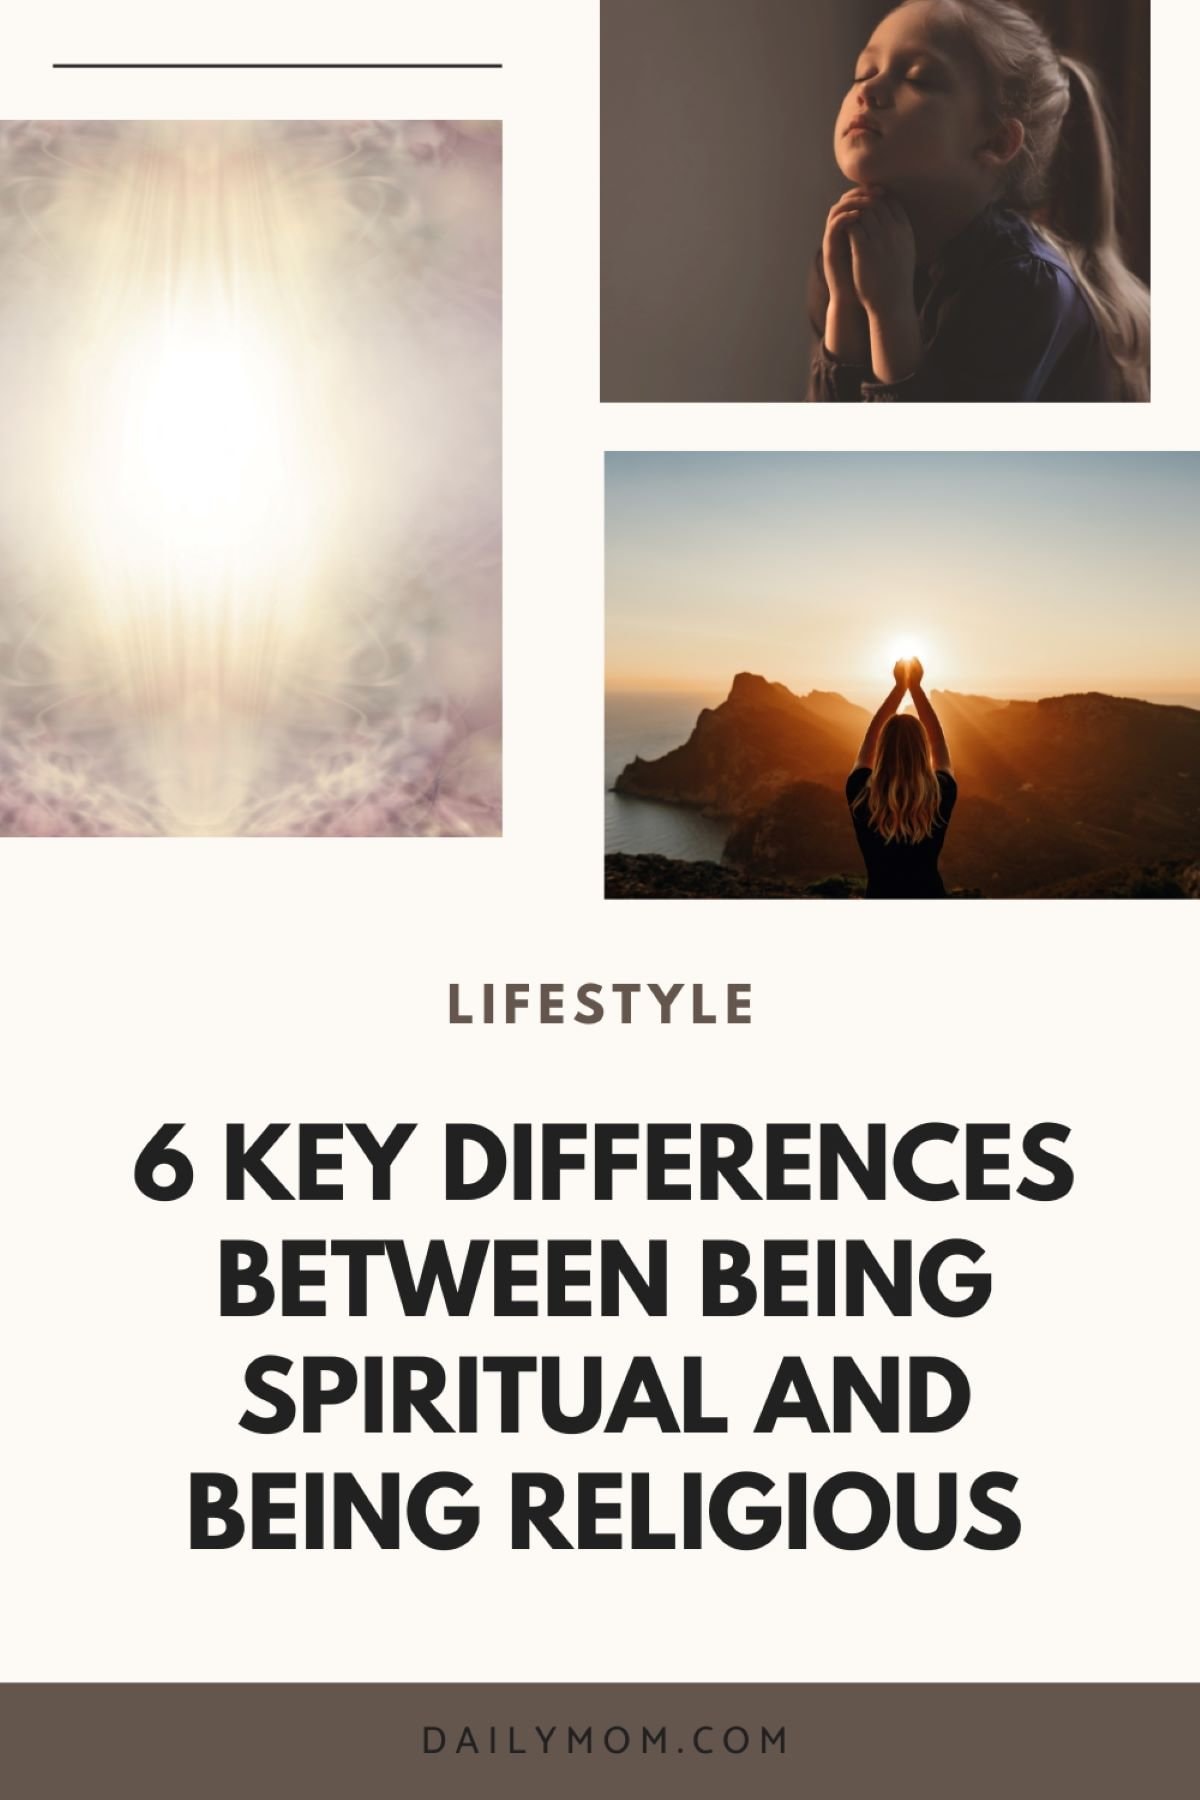 Spirituality Vs Religion: 6 Key Differences To Consider In Your Personal Spiritual And Religious Practices 6 Daily Mom, Magazine For Families